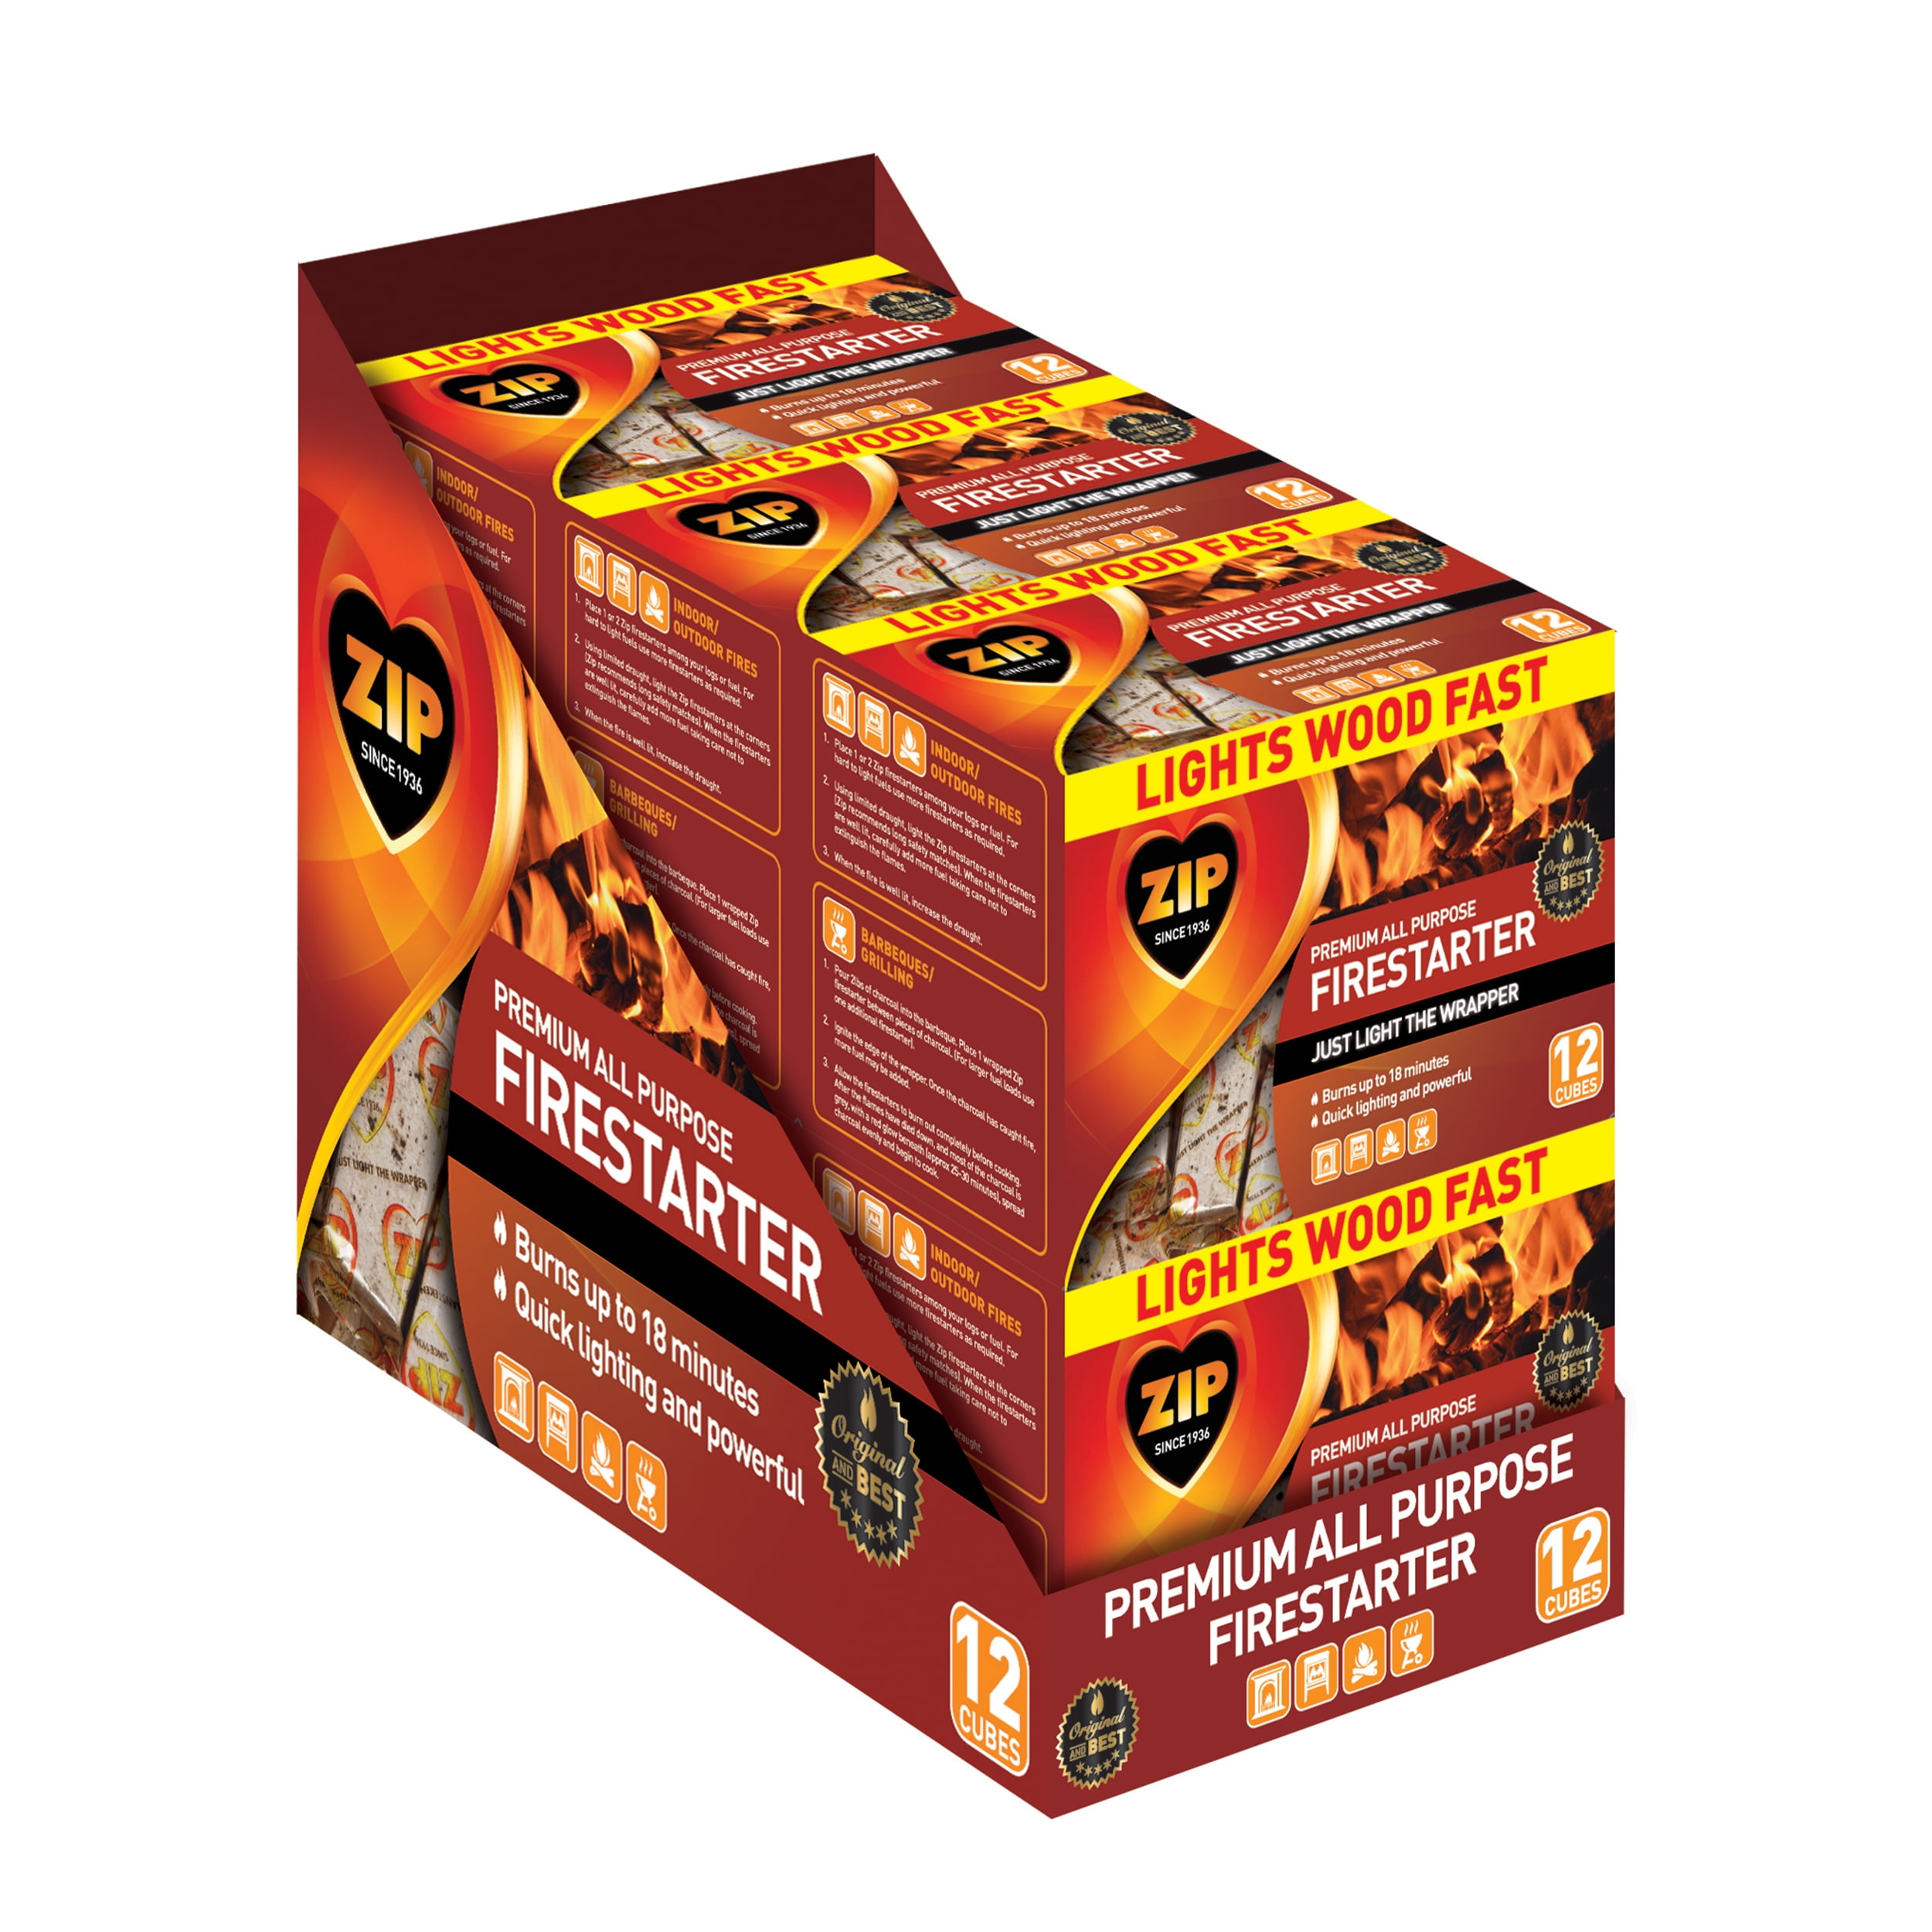 Zip Firestarters Premium All Purpose Wrapped Fire Starters 12 Pack, for Wood or Charcoal